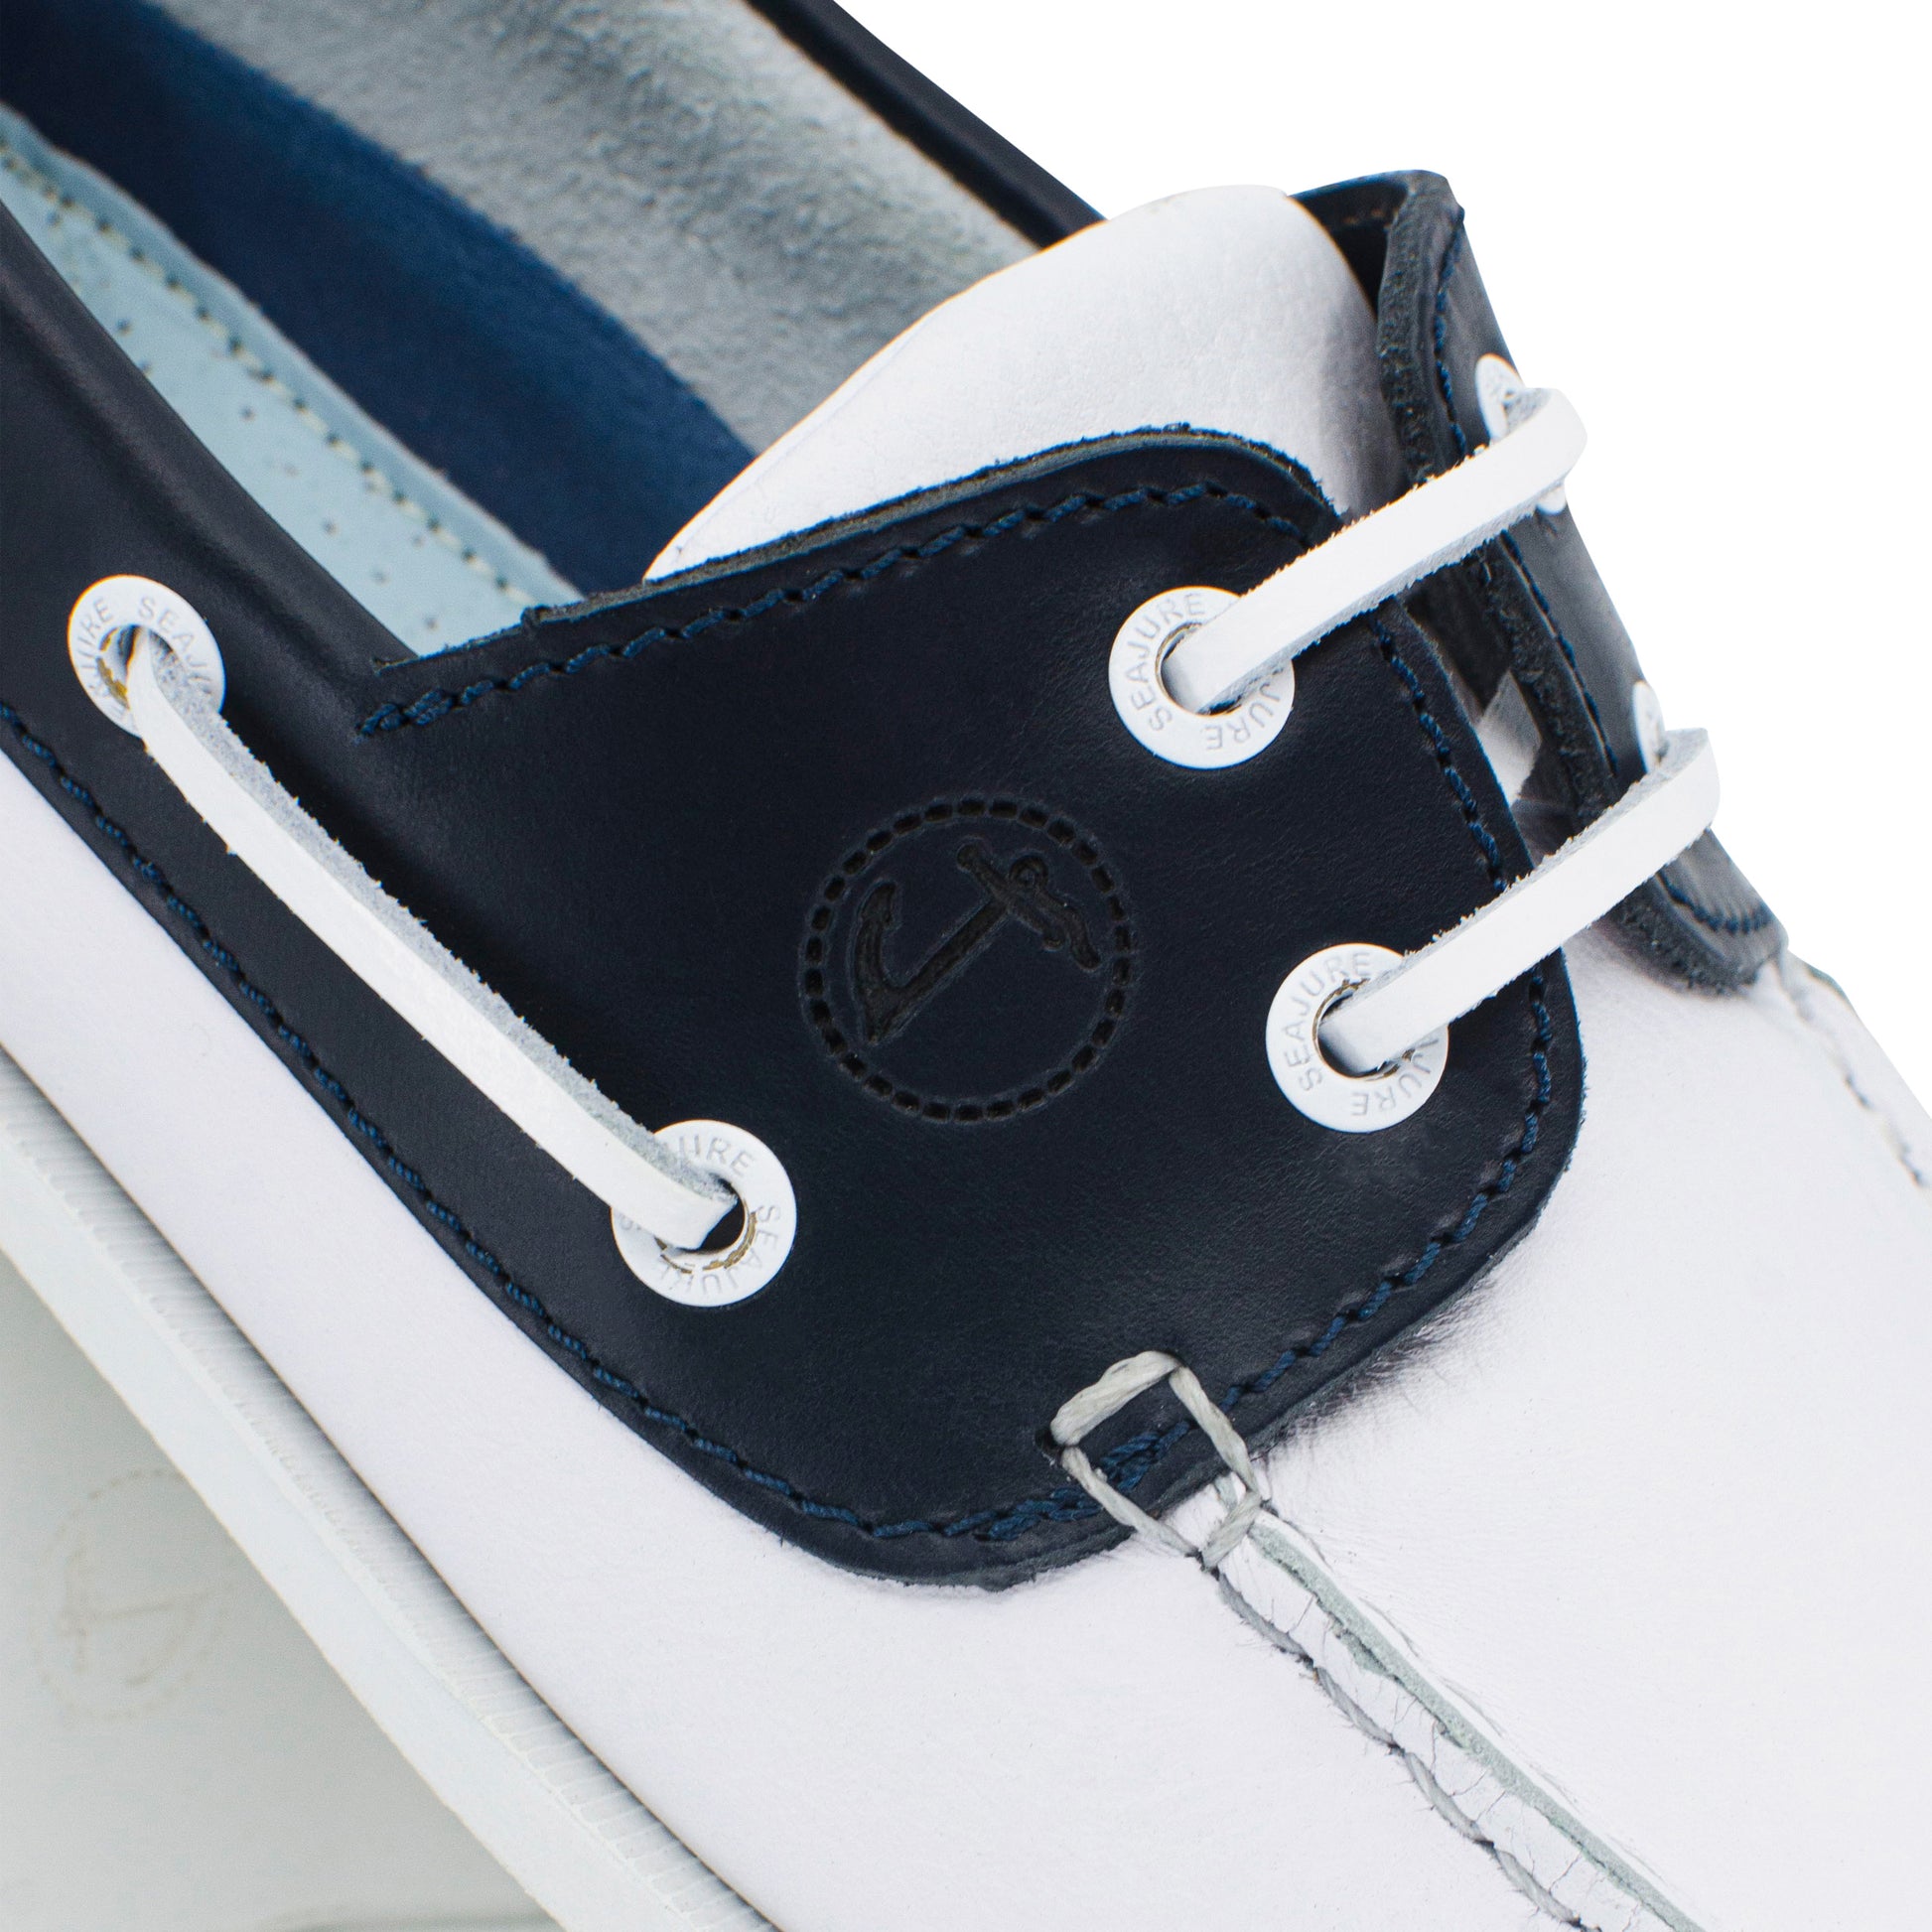 Men Boat Shoe White, Navy Blue and Red Leather Navagio Seajure